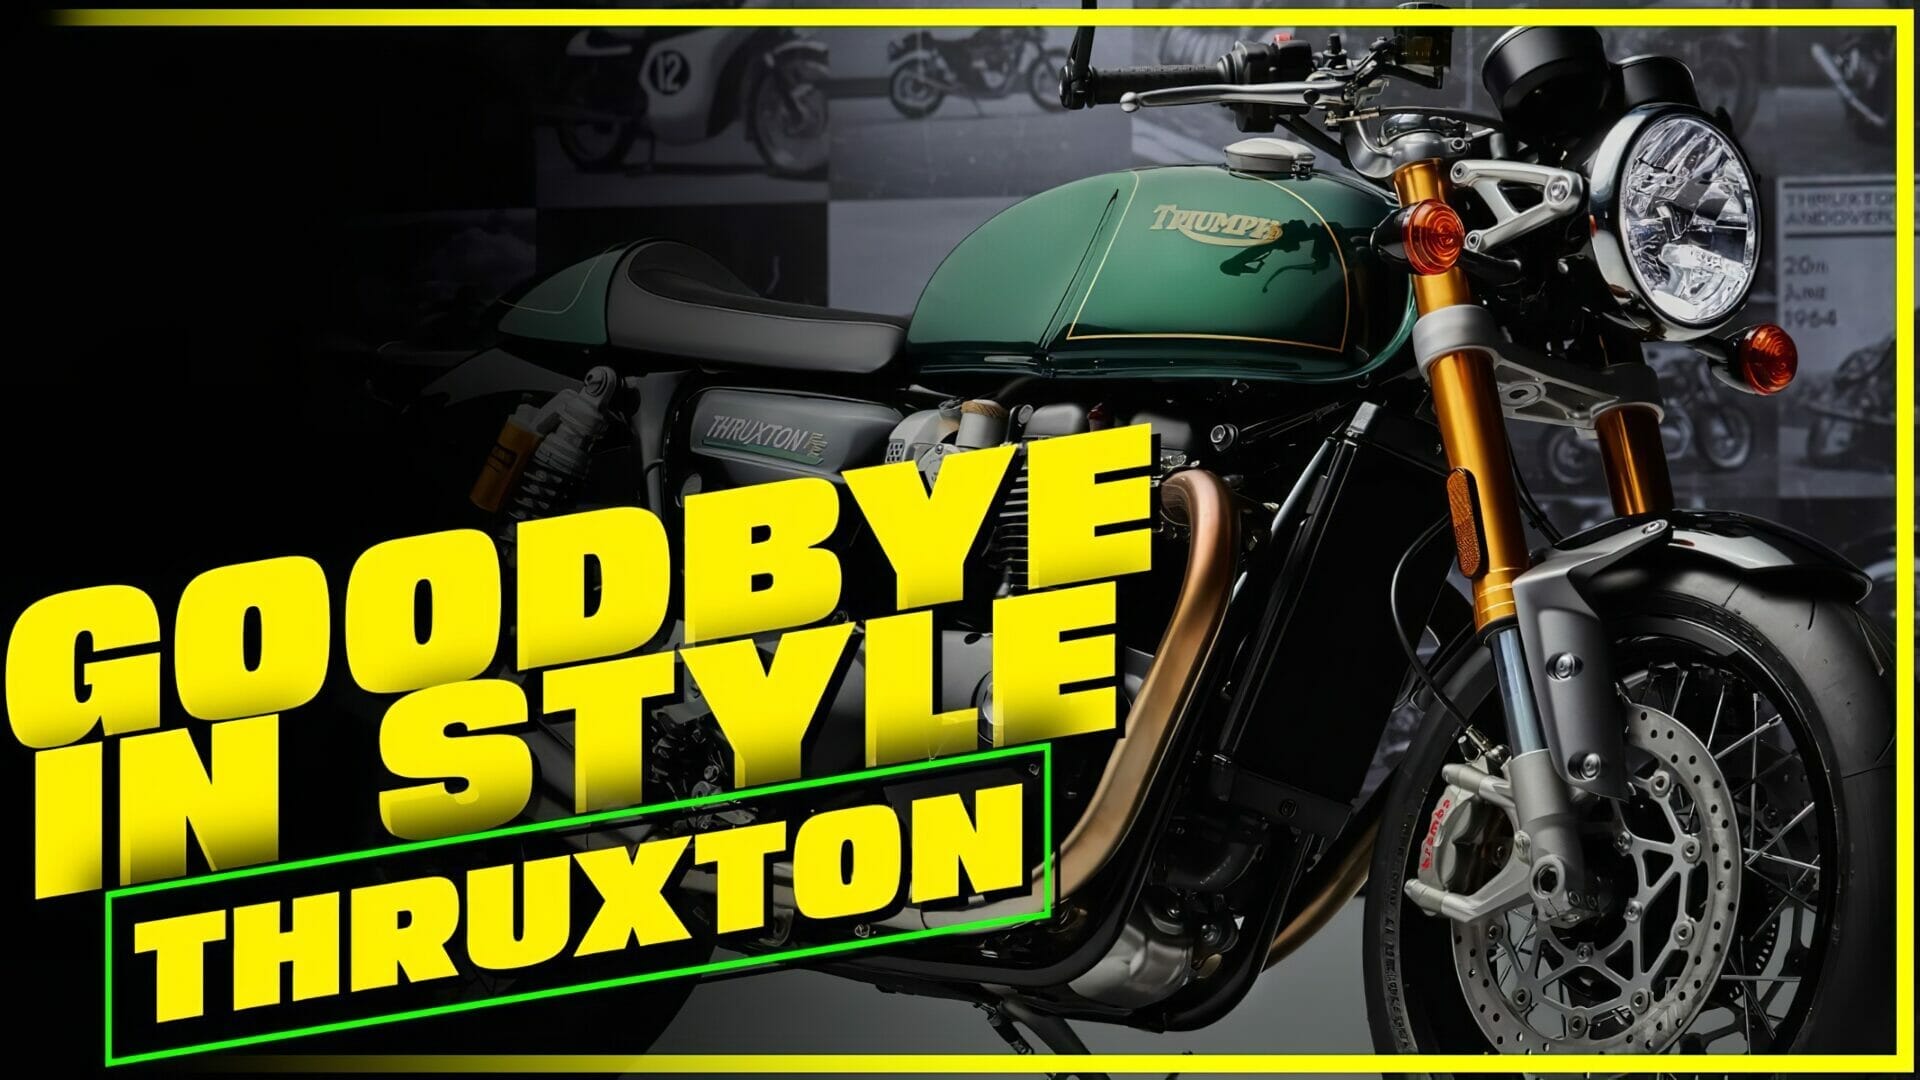 The Triumph Thruxton says goodbye in style: The Final Edition